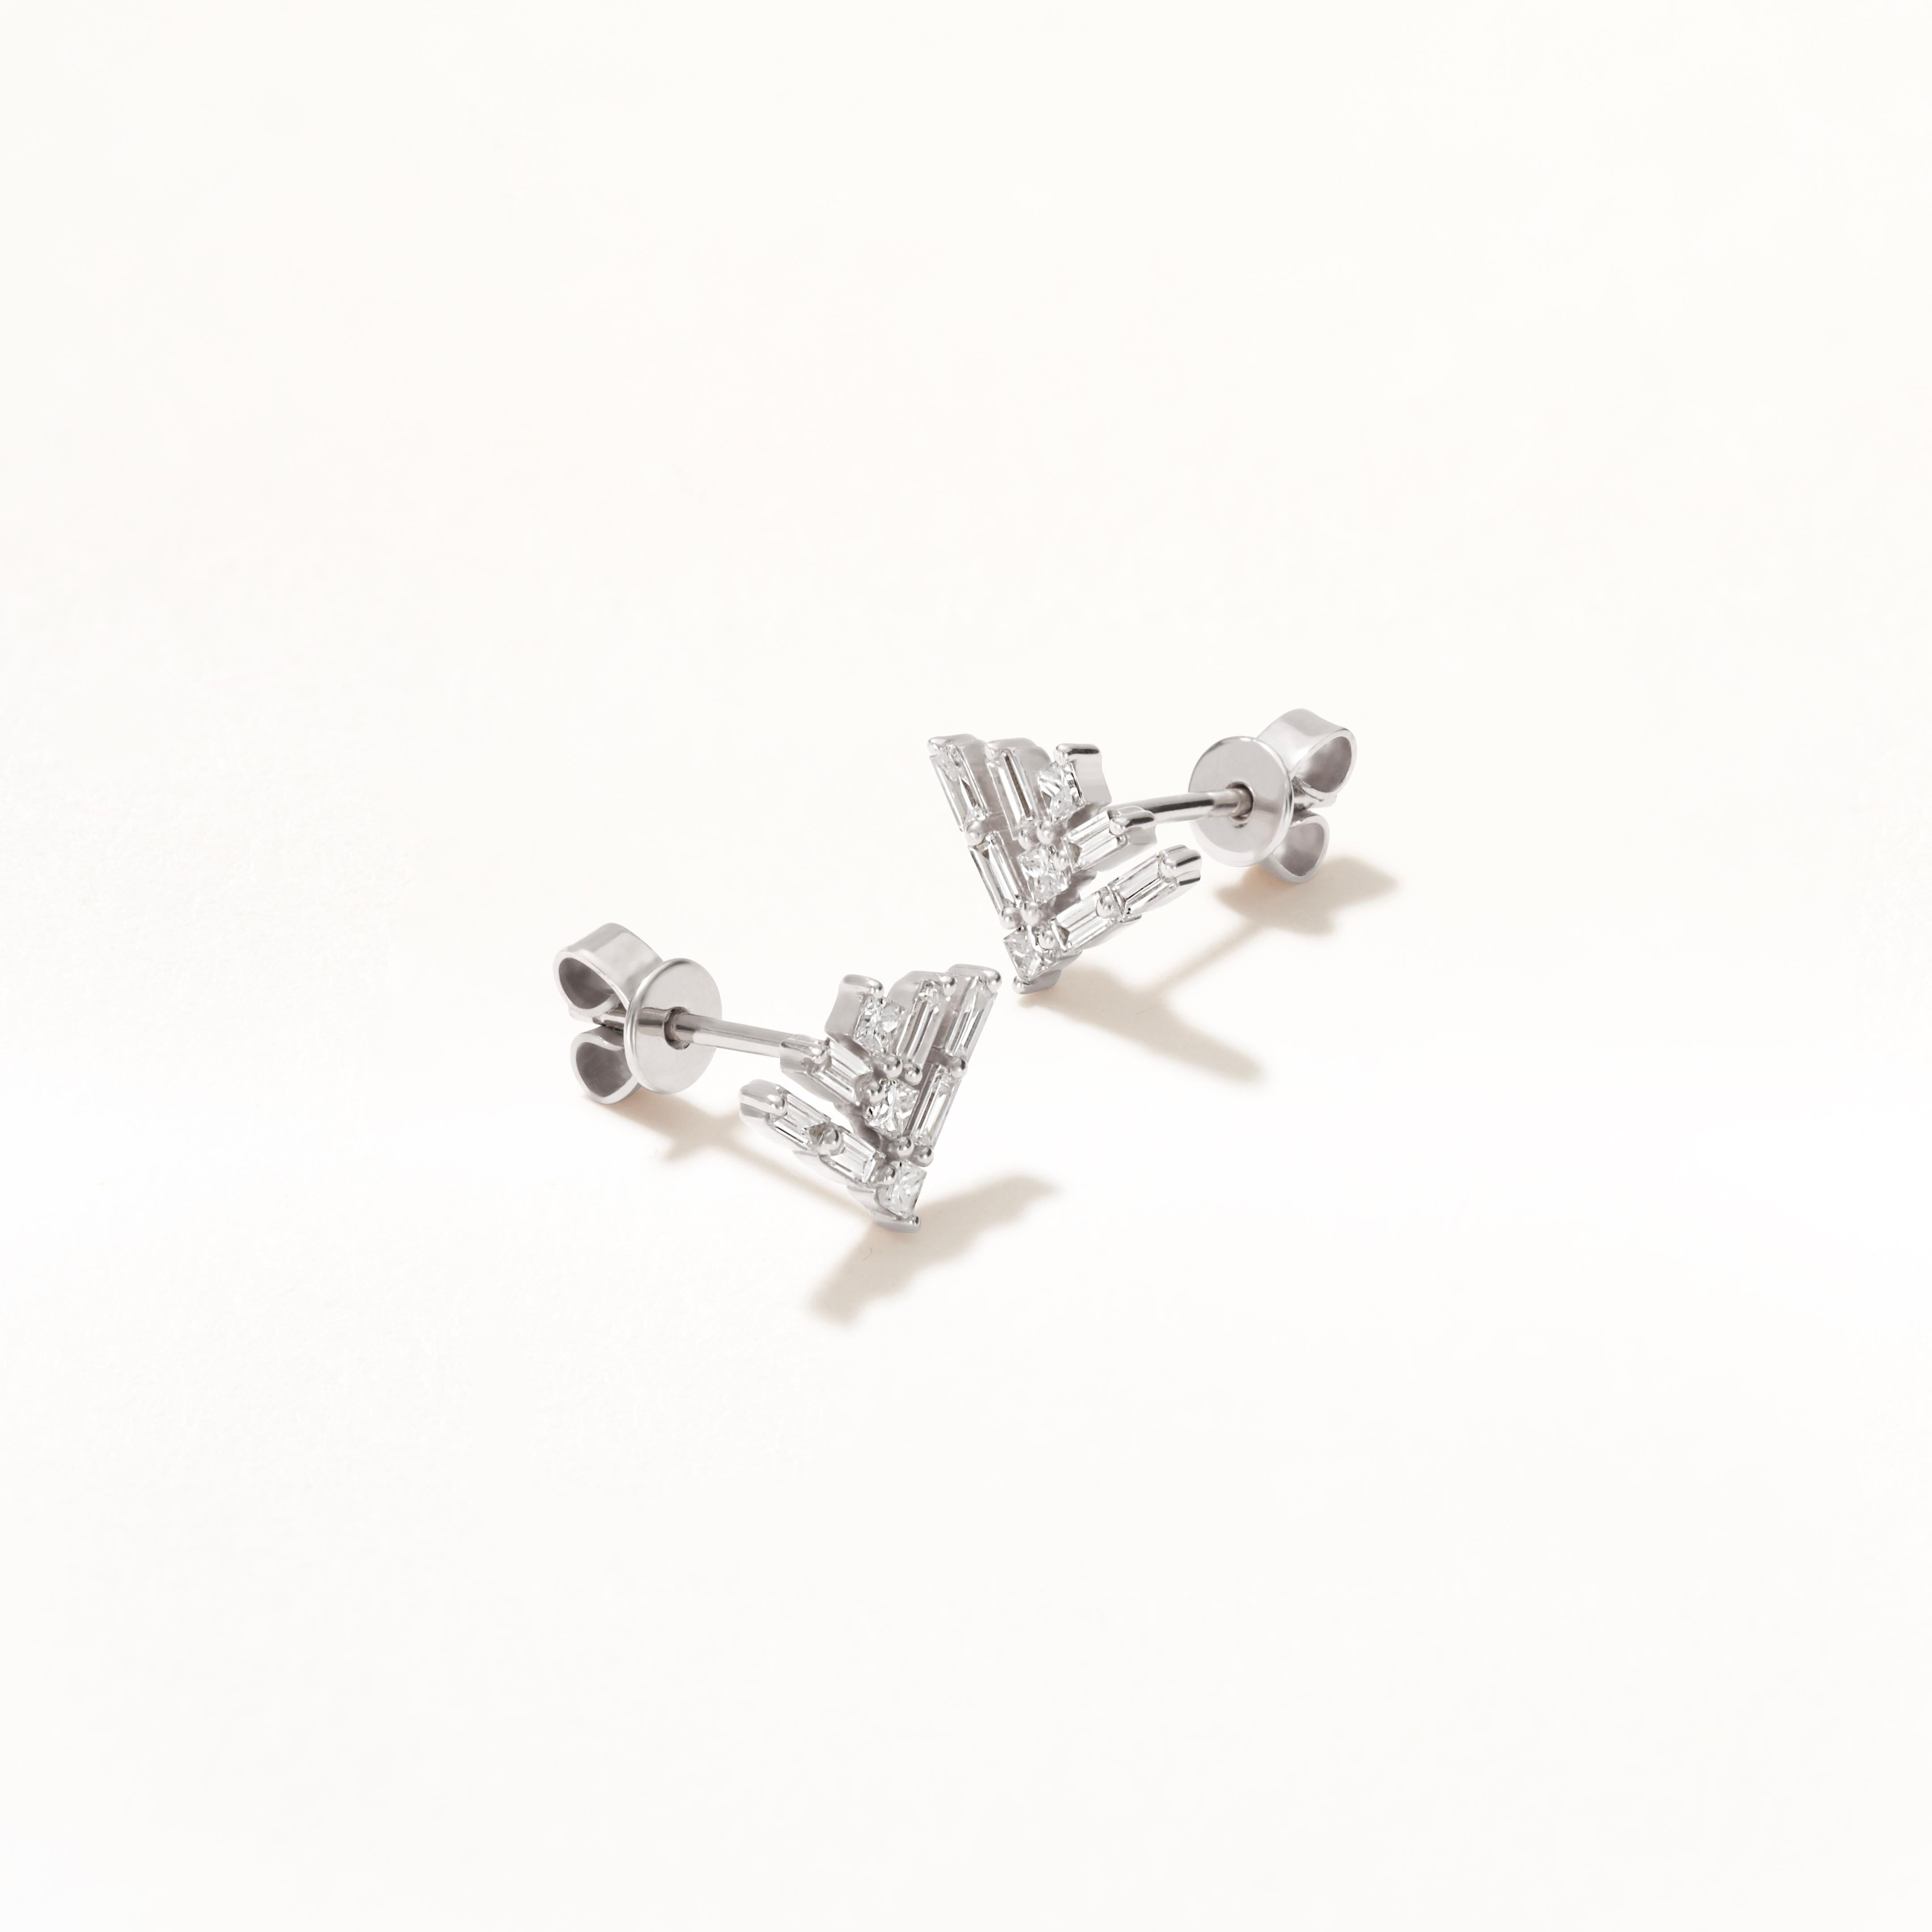 A pair of trendsetting studs made with 12 baguettes and 6 princess-cut diamonds set in alteration by Luxle. This pair comes with clutch backs.
Please follow the Luxury Jewels storefront to view the latest collections & exclusive one of a kind